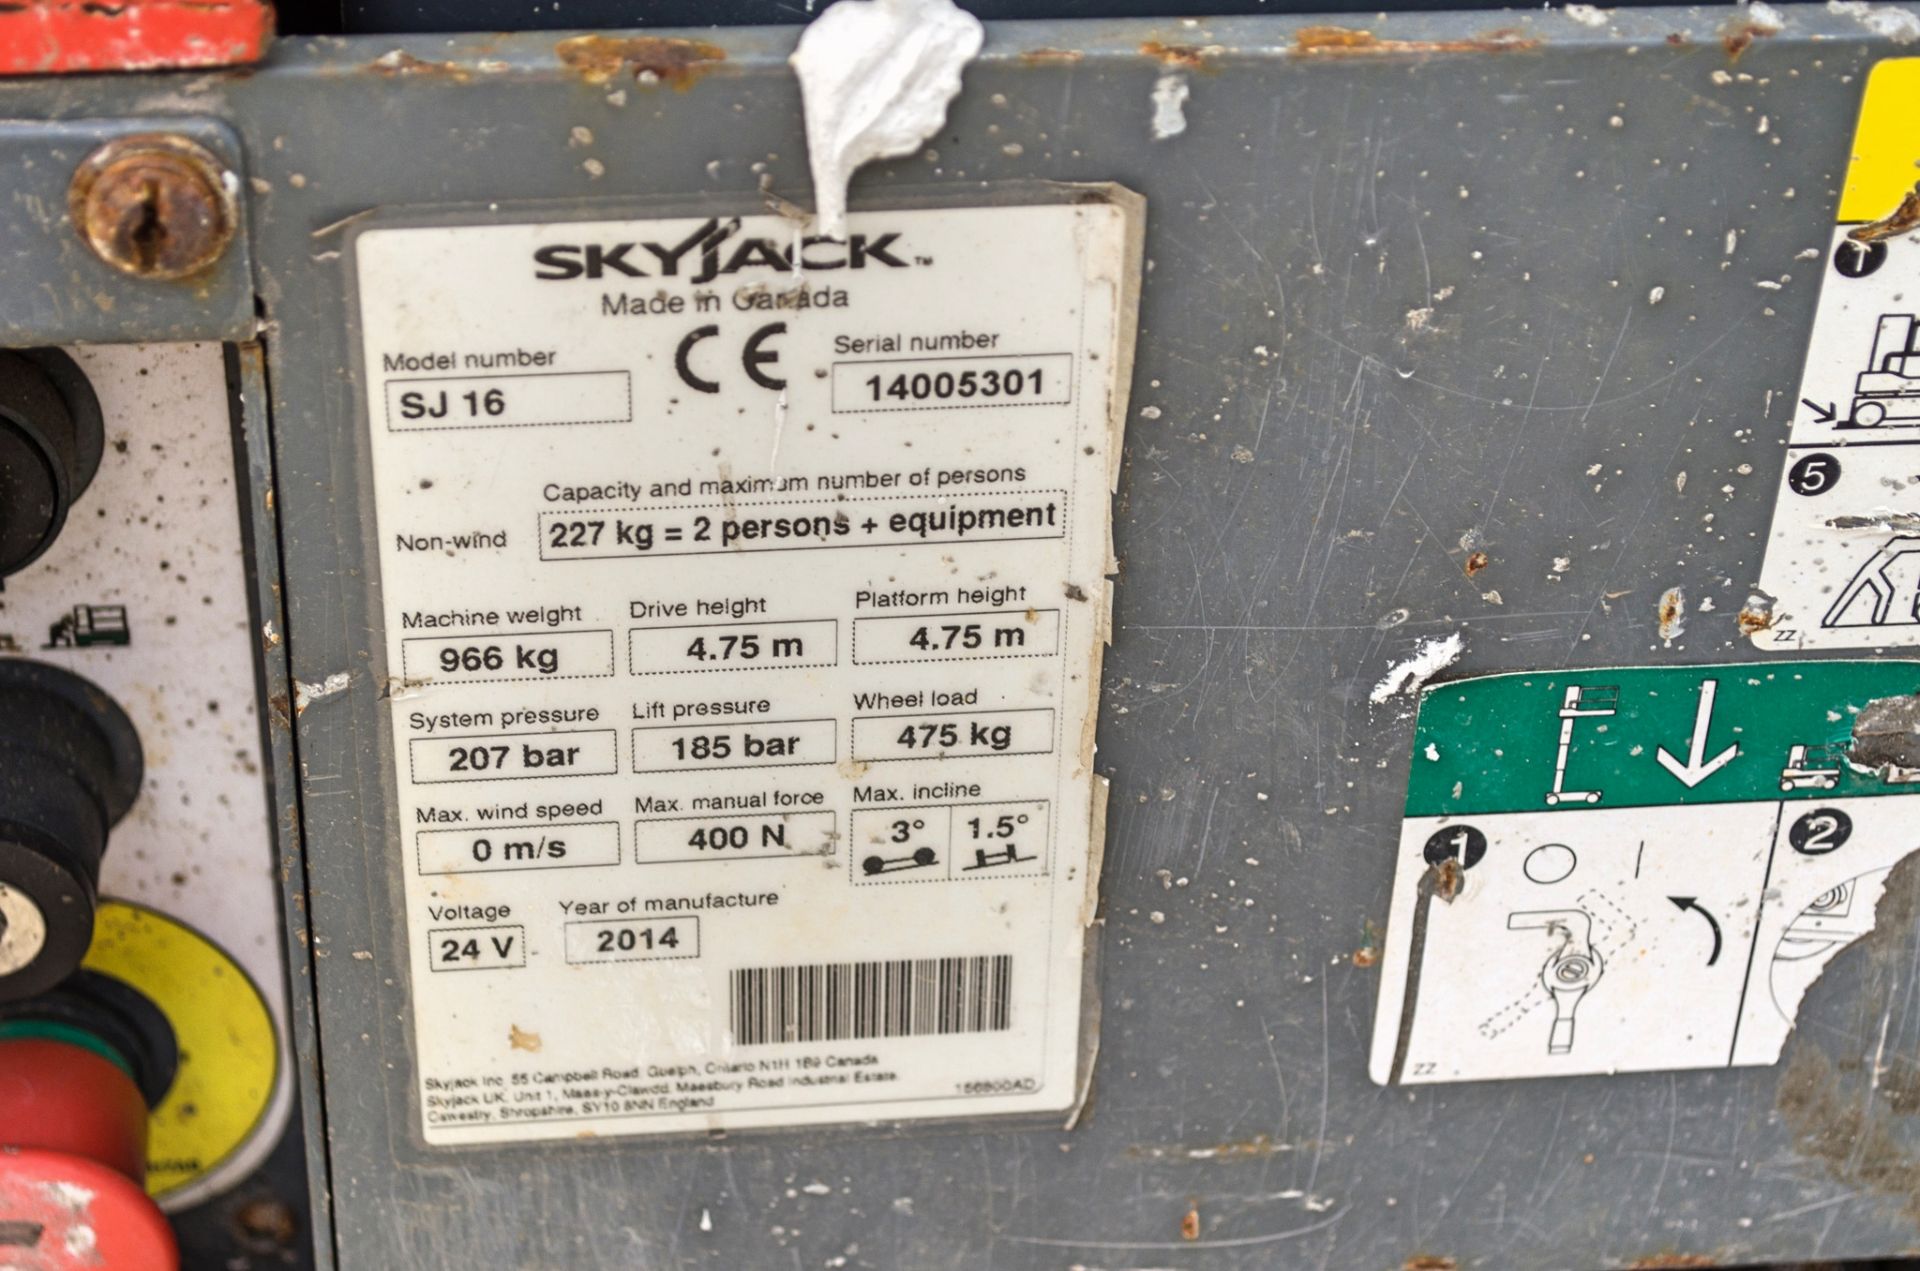 Skyjack SJ16 battery electric vertical mast access platform Year: 2014 S/N: 14005301 Recorded Hours: - Image 9 of 9